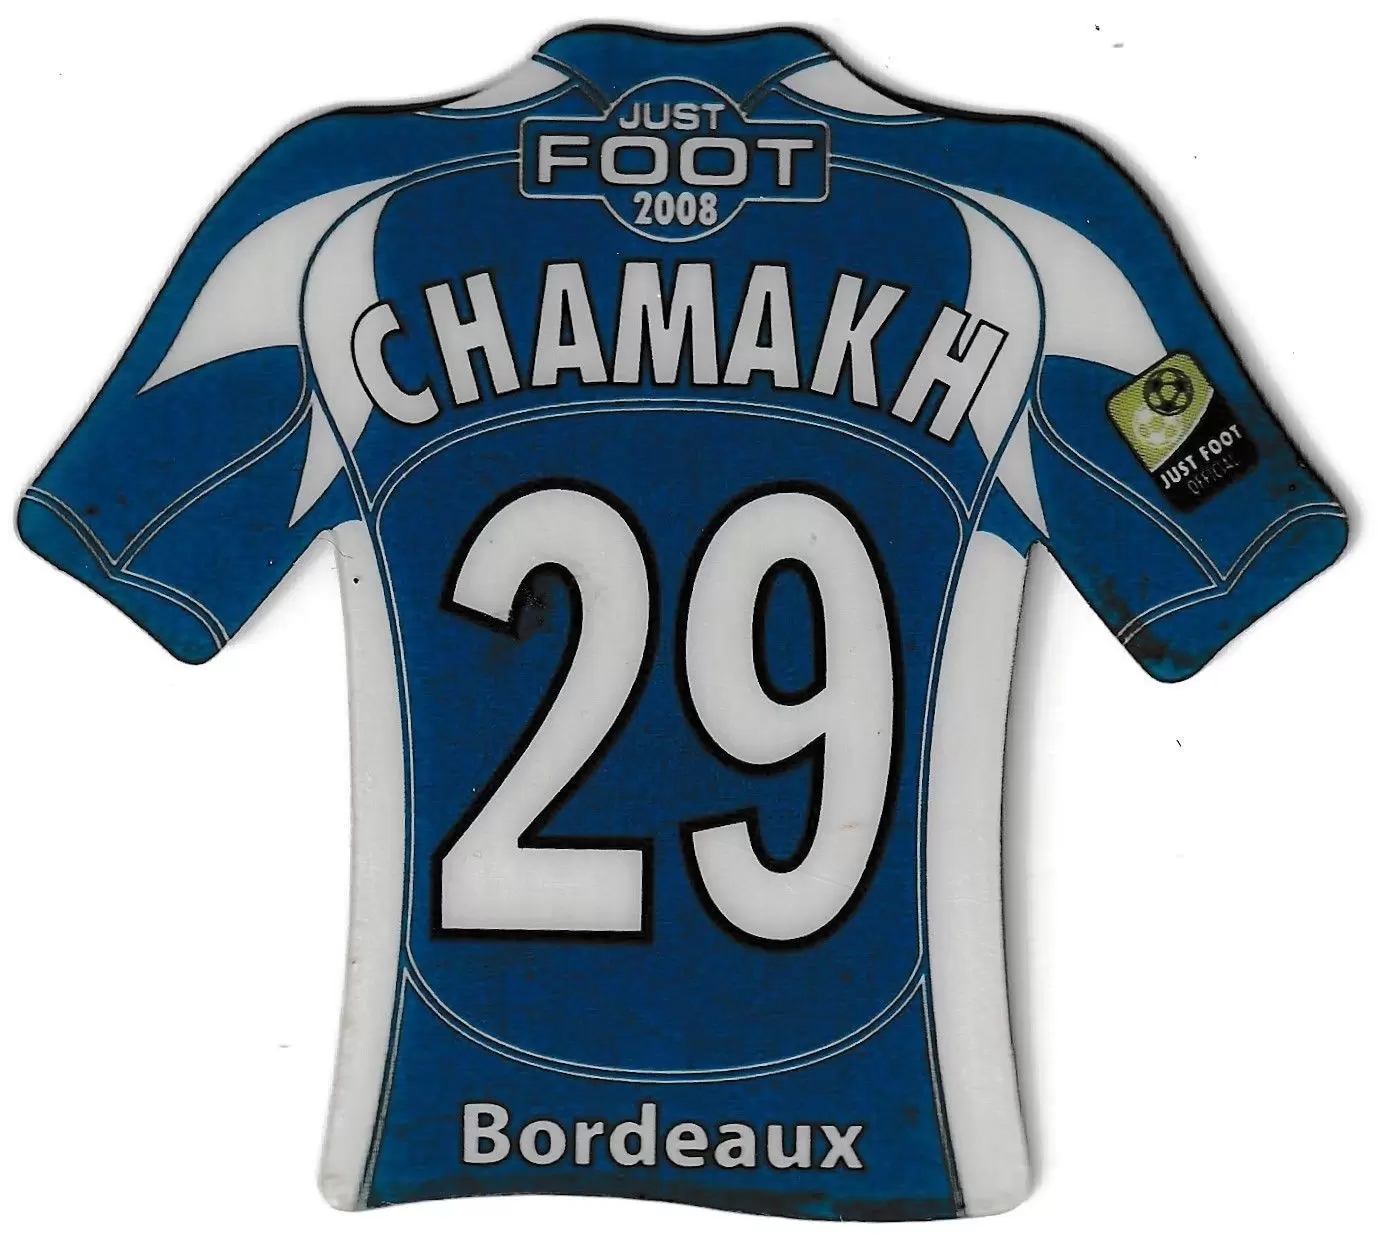 Just Foot 2008 - Bordeaux 29 - Chamask